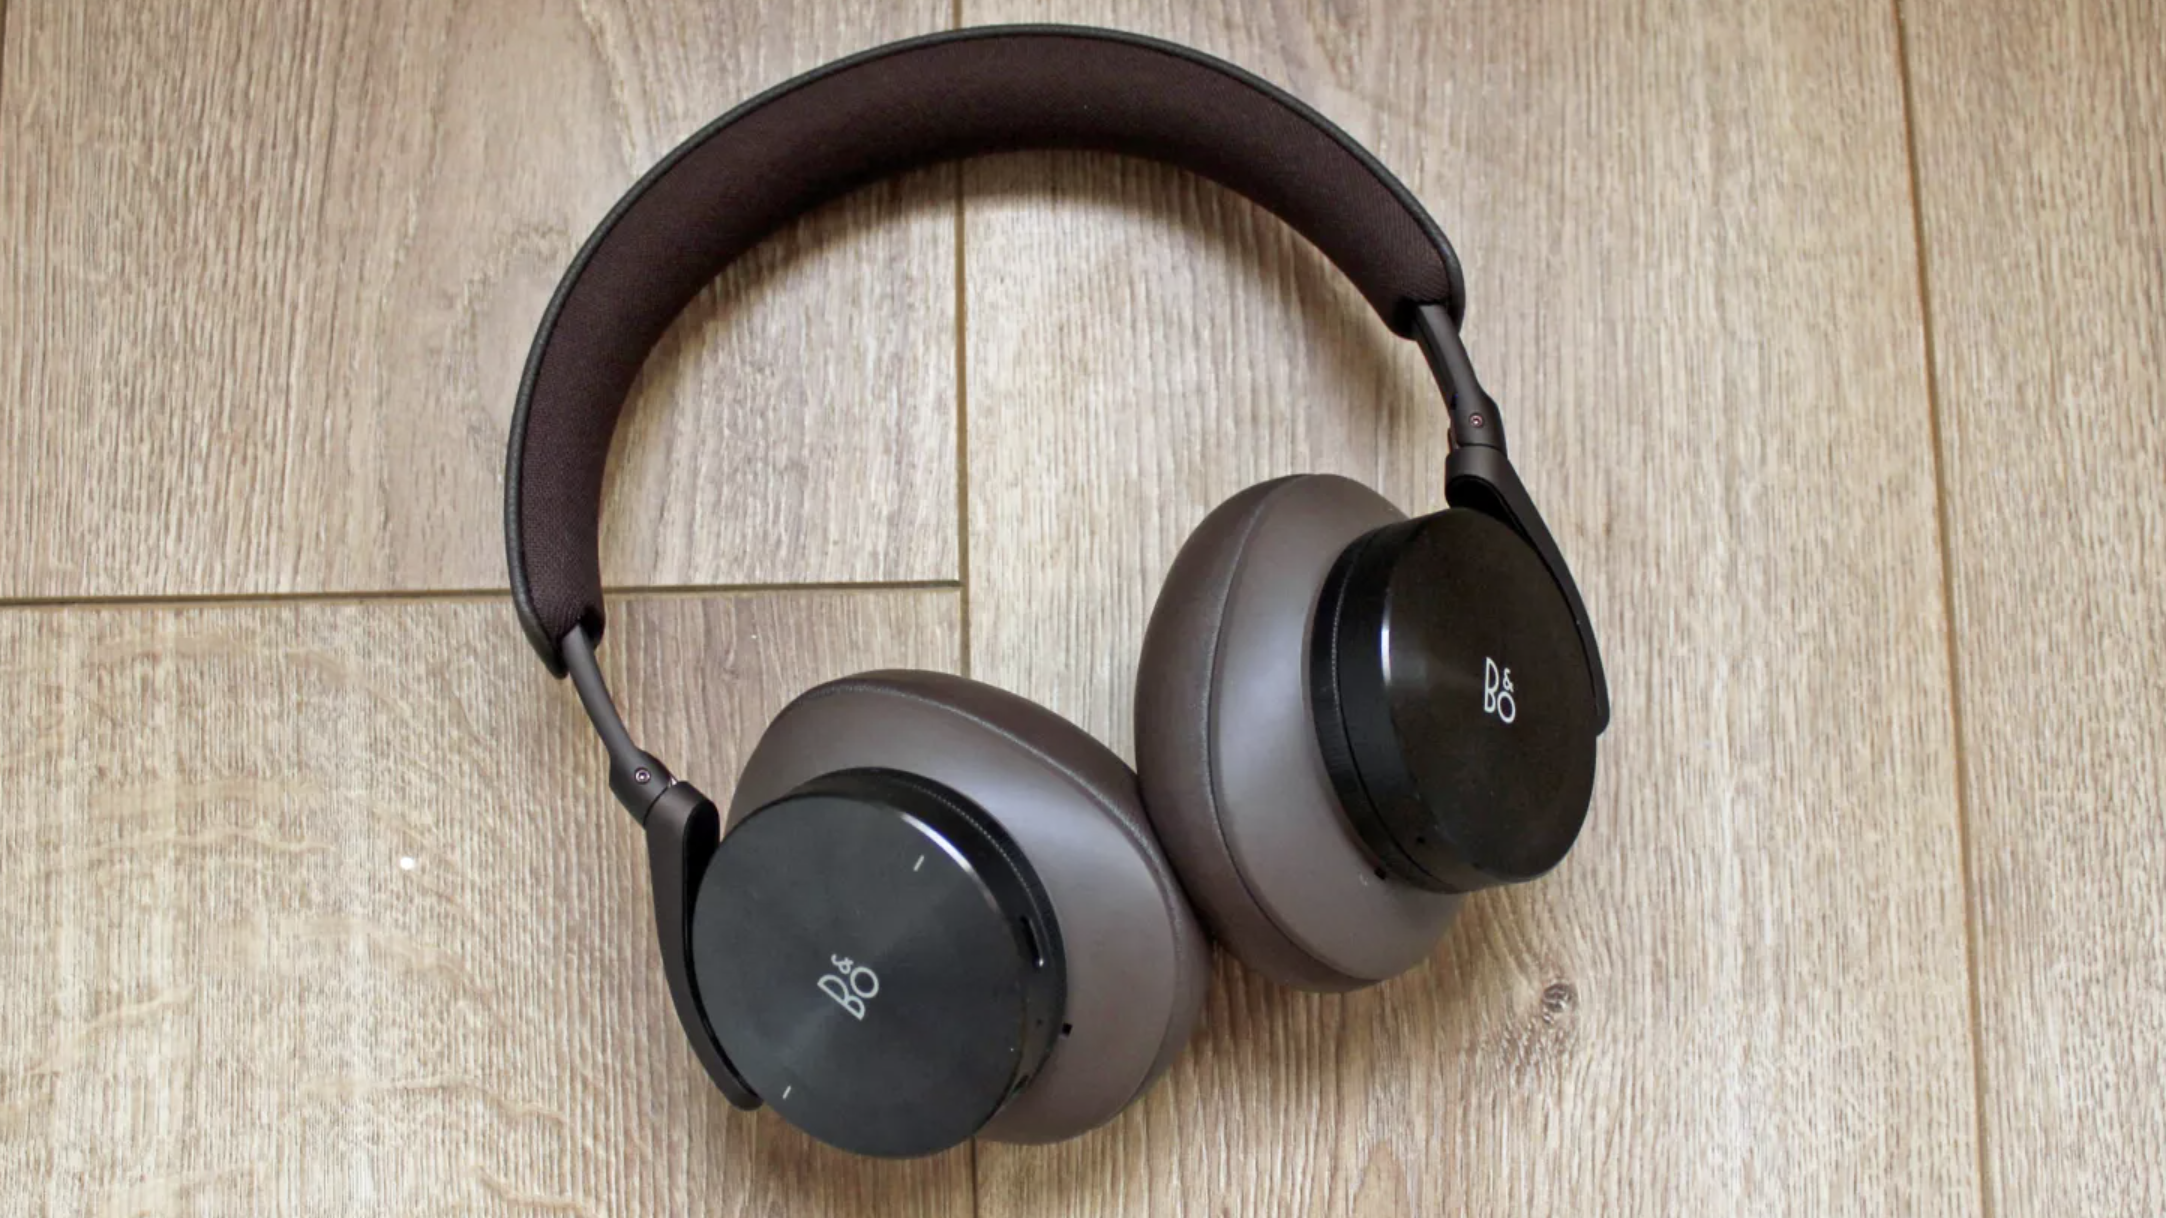 The Bang & Olufsen Beoplay H95 wireless headphones on a wooden surface